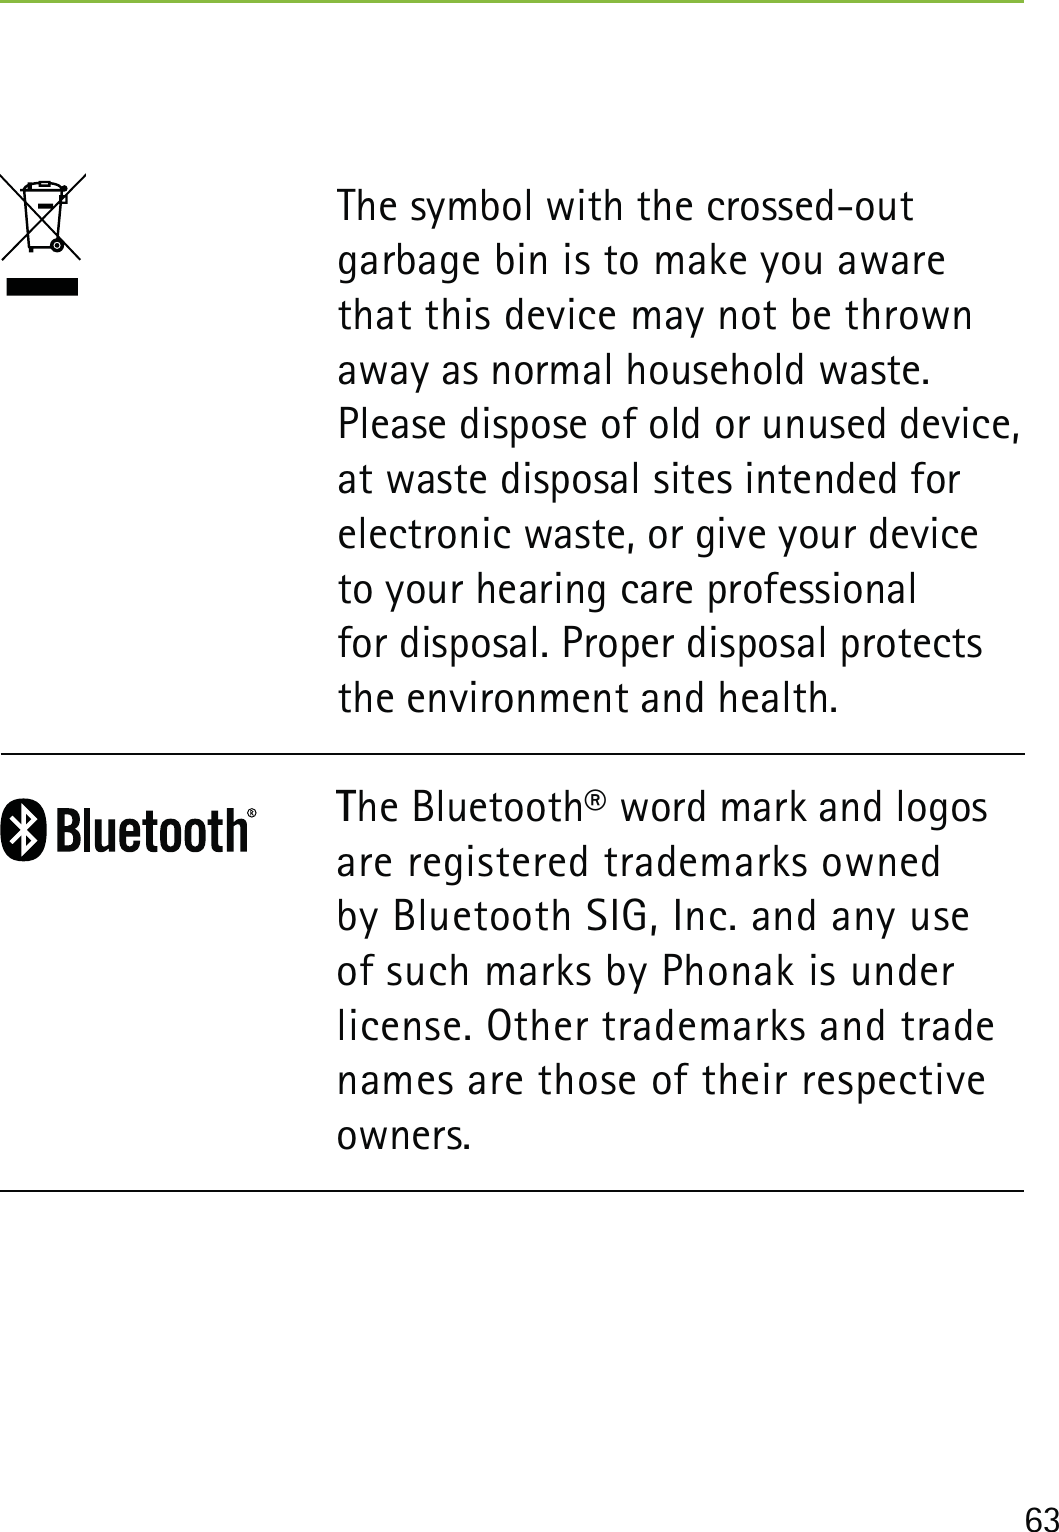 63The symbol with the crossed-out garbage bin is to make you aware that this device may not be thrown away as normal household waste. Please dispose of old or unused device, at waste disposal sites intended for electronic waste, or give your device to your hearing care professional  for disposal. Proper disposal protects the environment and health.The Bluetooth® word mark and logos are registered trademarks owned by Bluetooth SIG, Inc. and any use of such marks by Phonak is under license. Other trademarks and trade names are those of their respective owners.